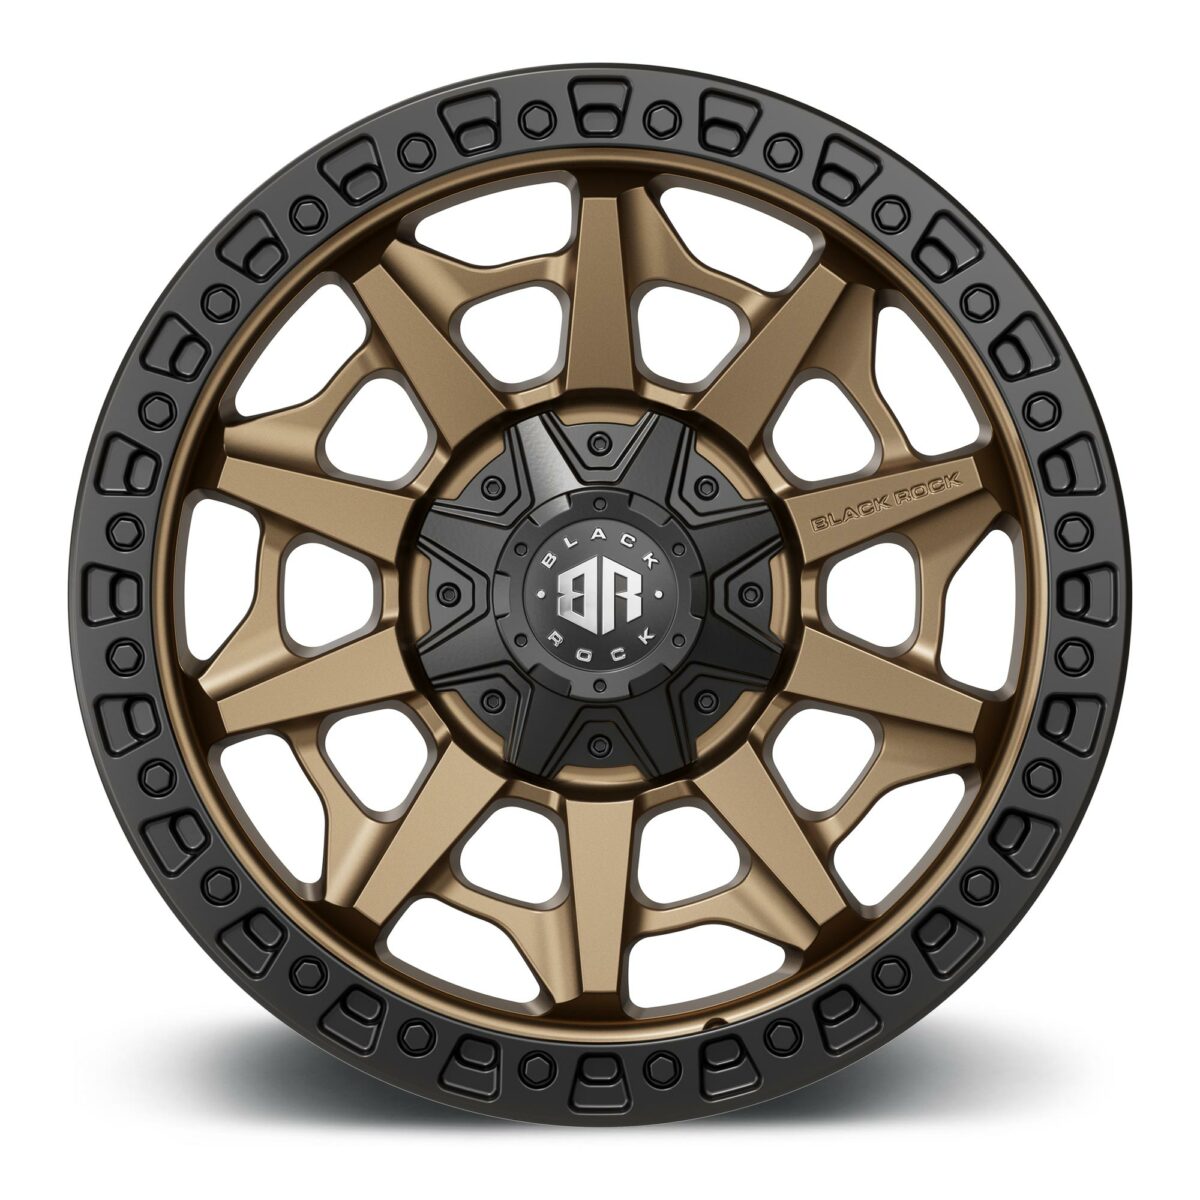 20 inch Black Rock Cage Dark Bronze With Black Ring Wheels Off-Road 4x4 4WD Rims